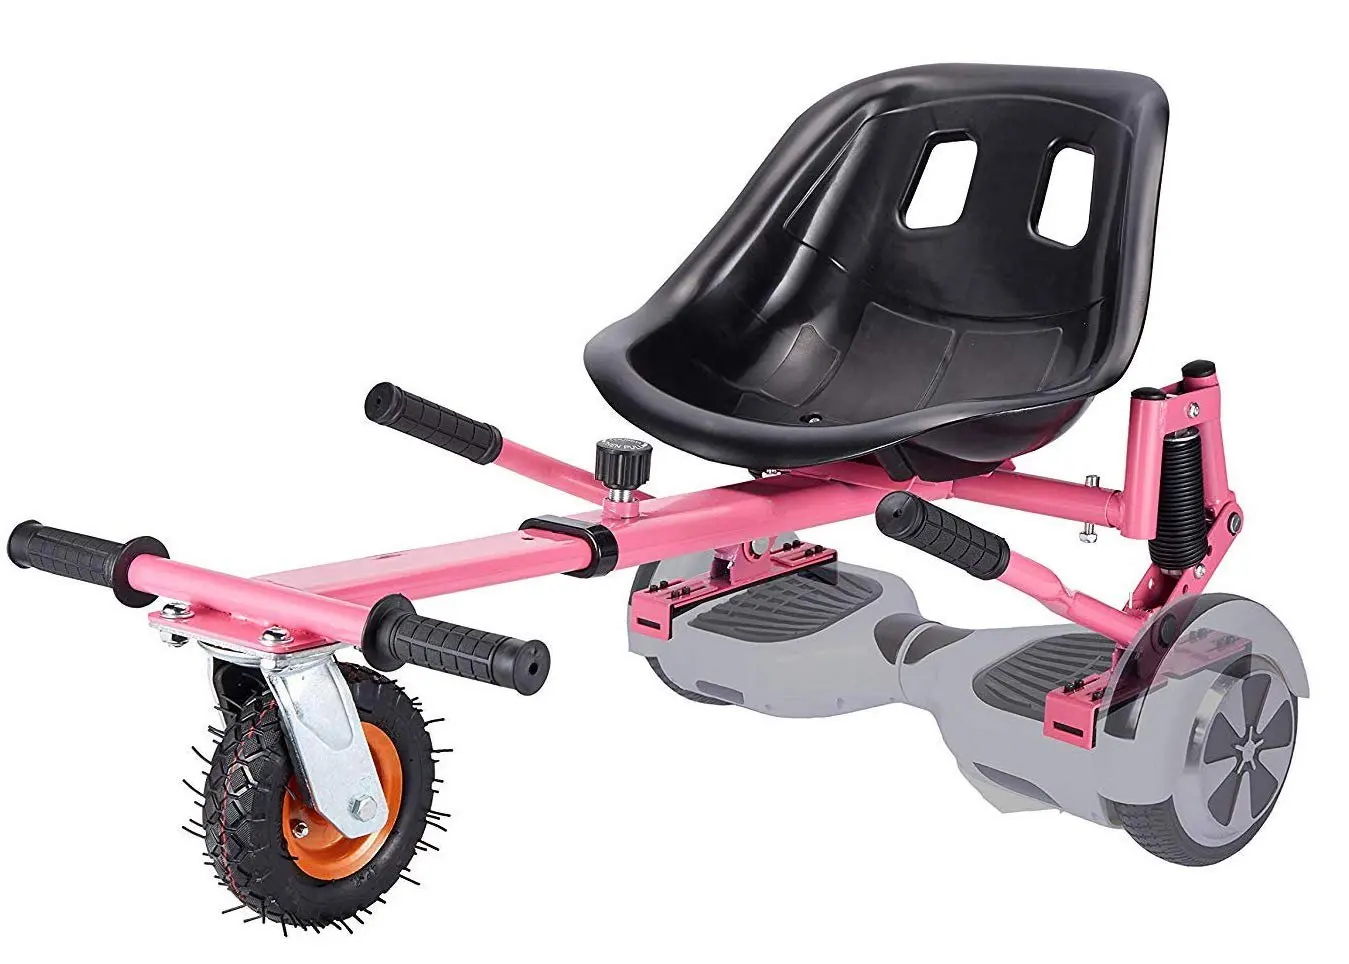 

Hoverboards All In One Hover Cart Attachment for Hoverboard - Transform your into a Go Kart with Hovercart - Pink